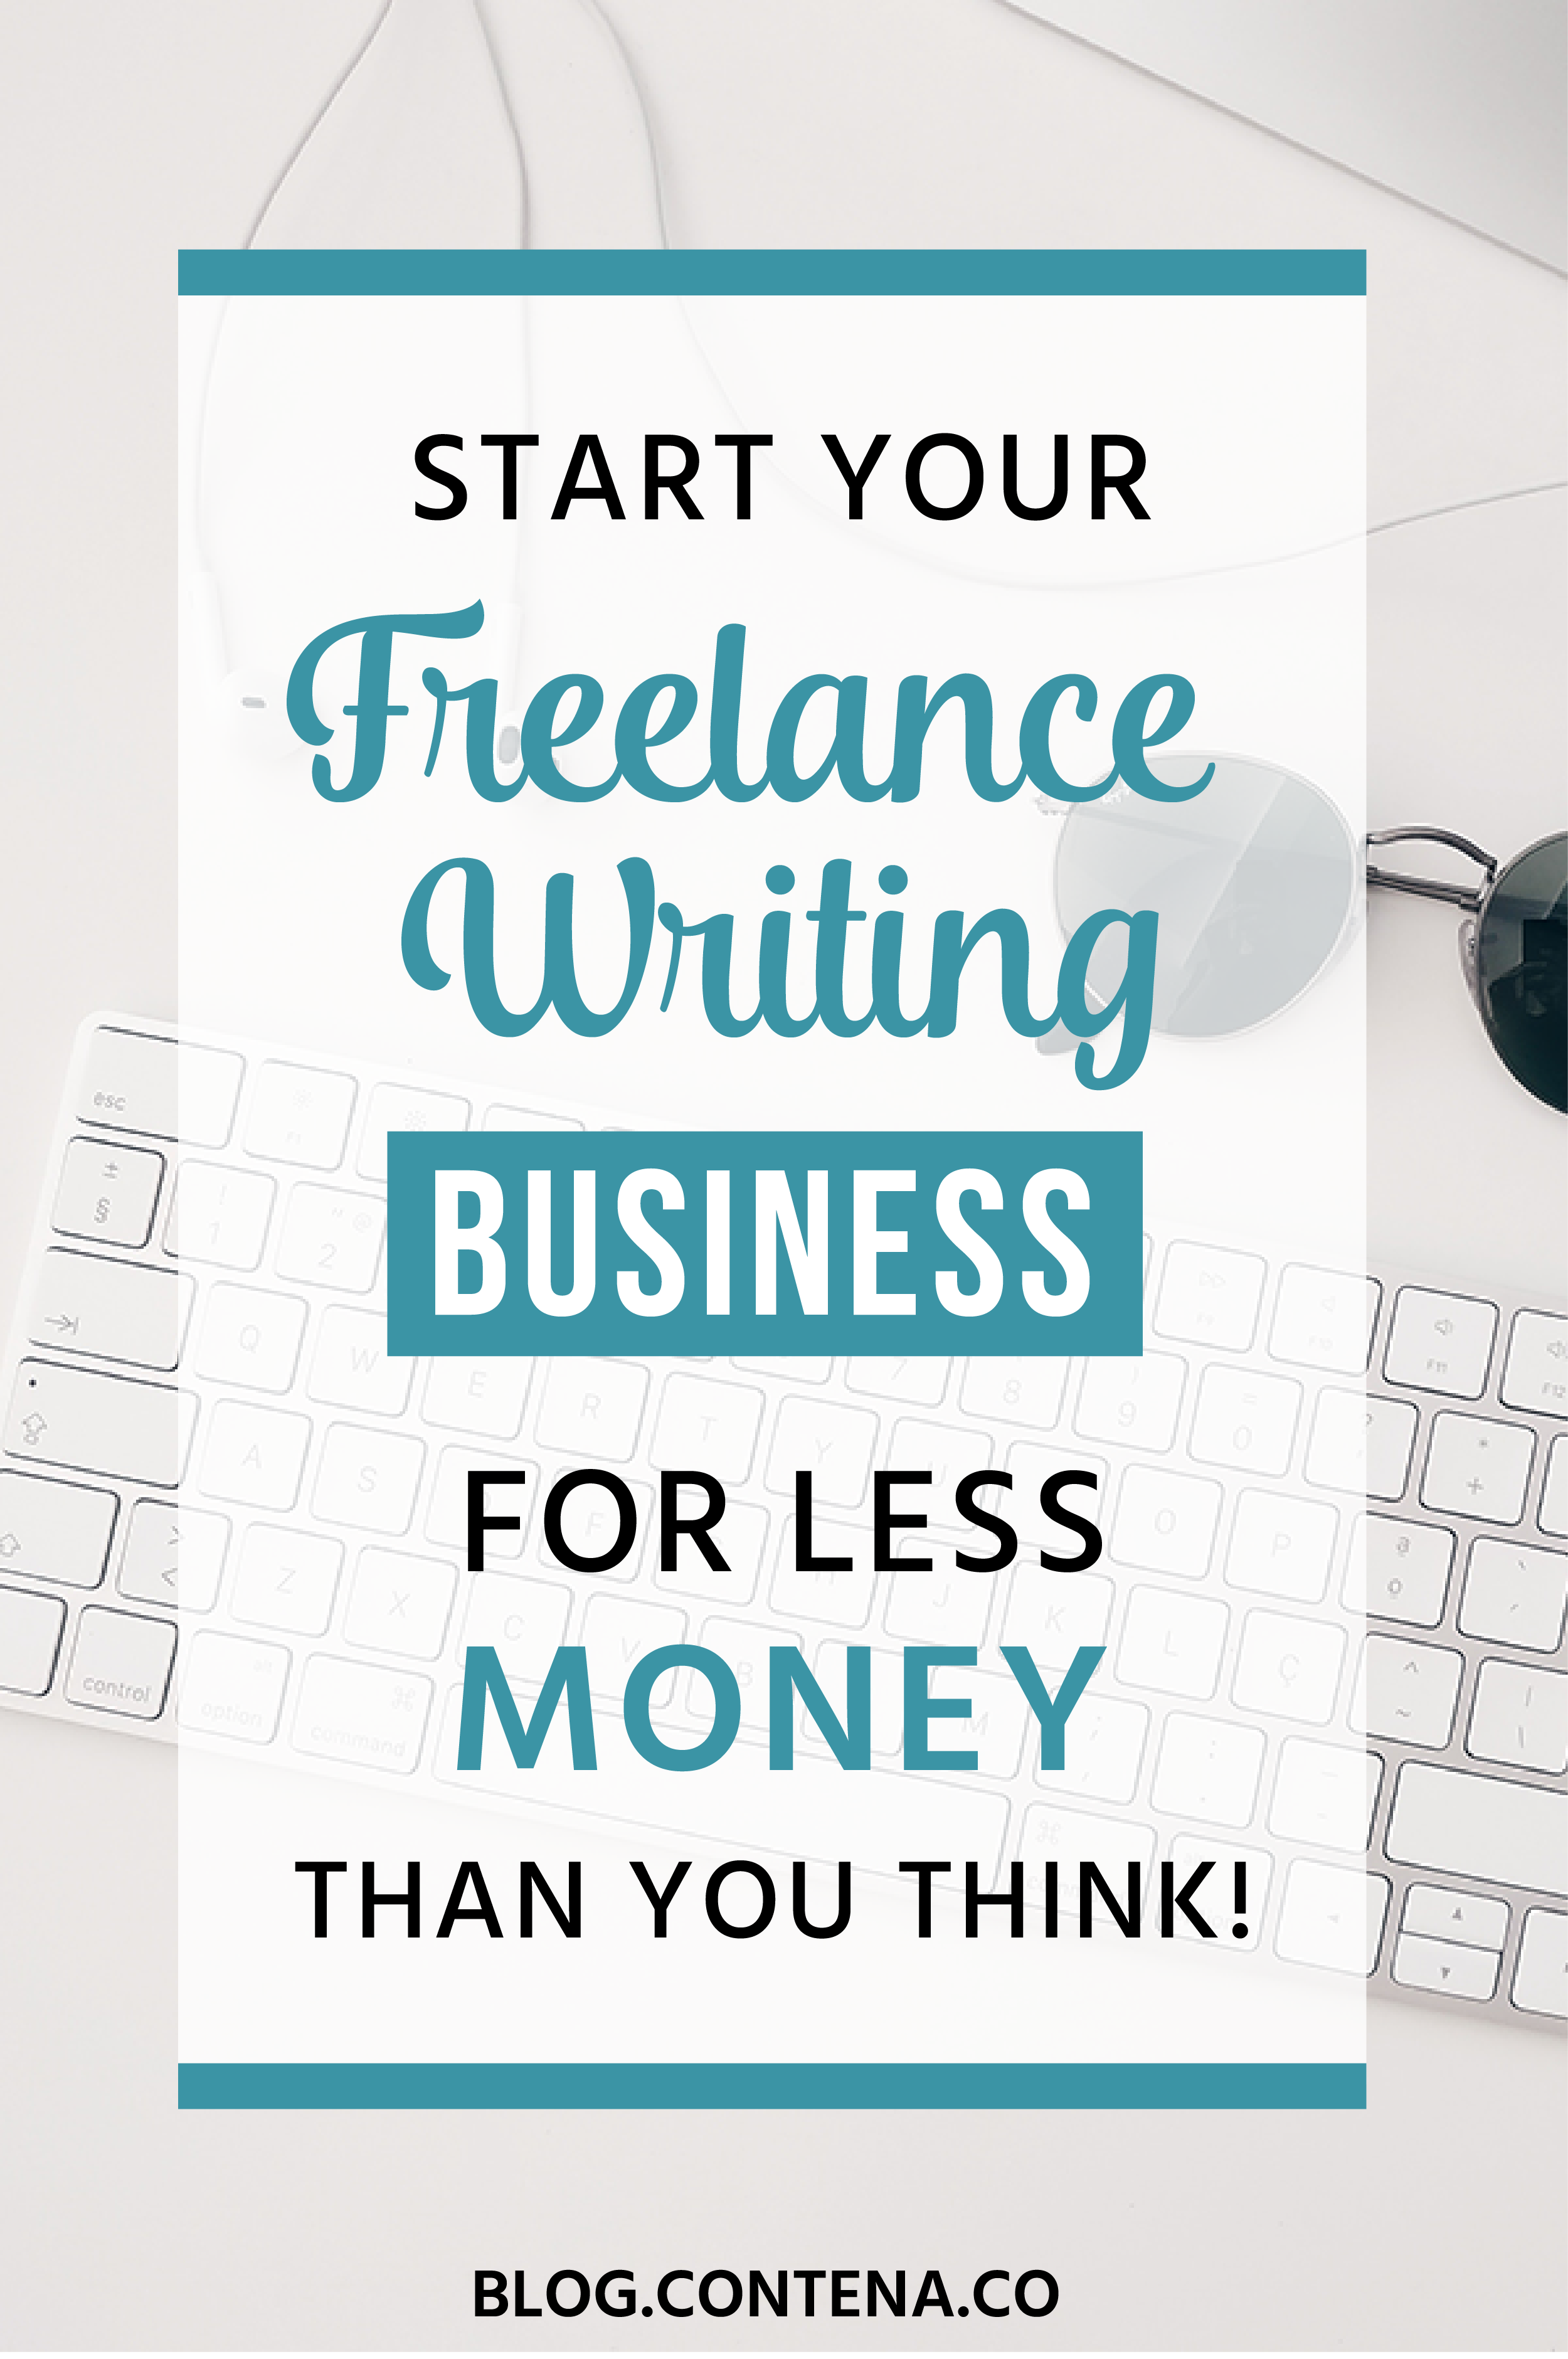 How to start your freelance writing business for less money than you think! Beginner freelancers donâ€™t need to spend a lot of money to find jobs as a freelance writer. Here are our tips to build your work from home business. #FreelanceWriting #OnlineBusiness #Freelancing #WorkFromHome #RemoteWork #Money #FreelanceWriter